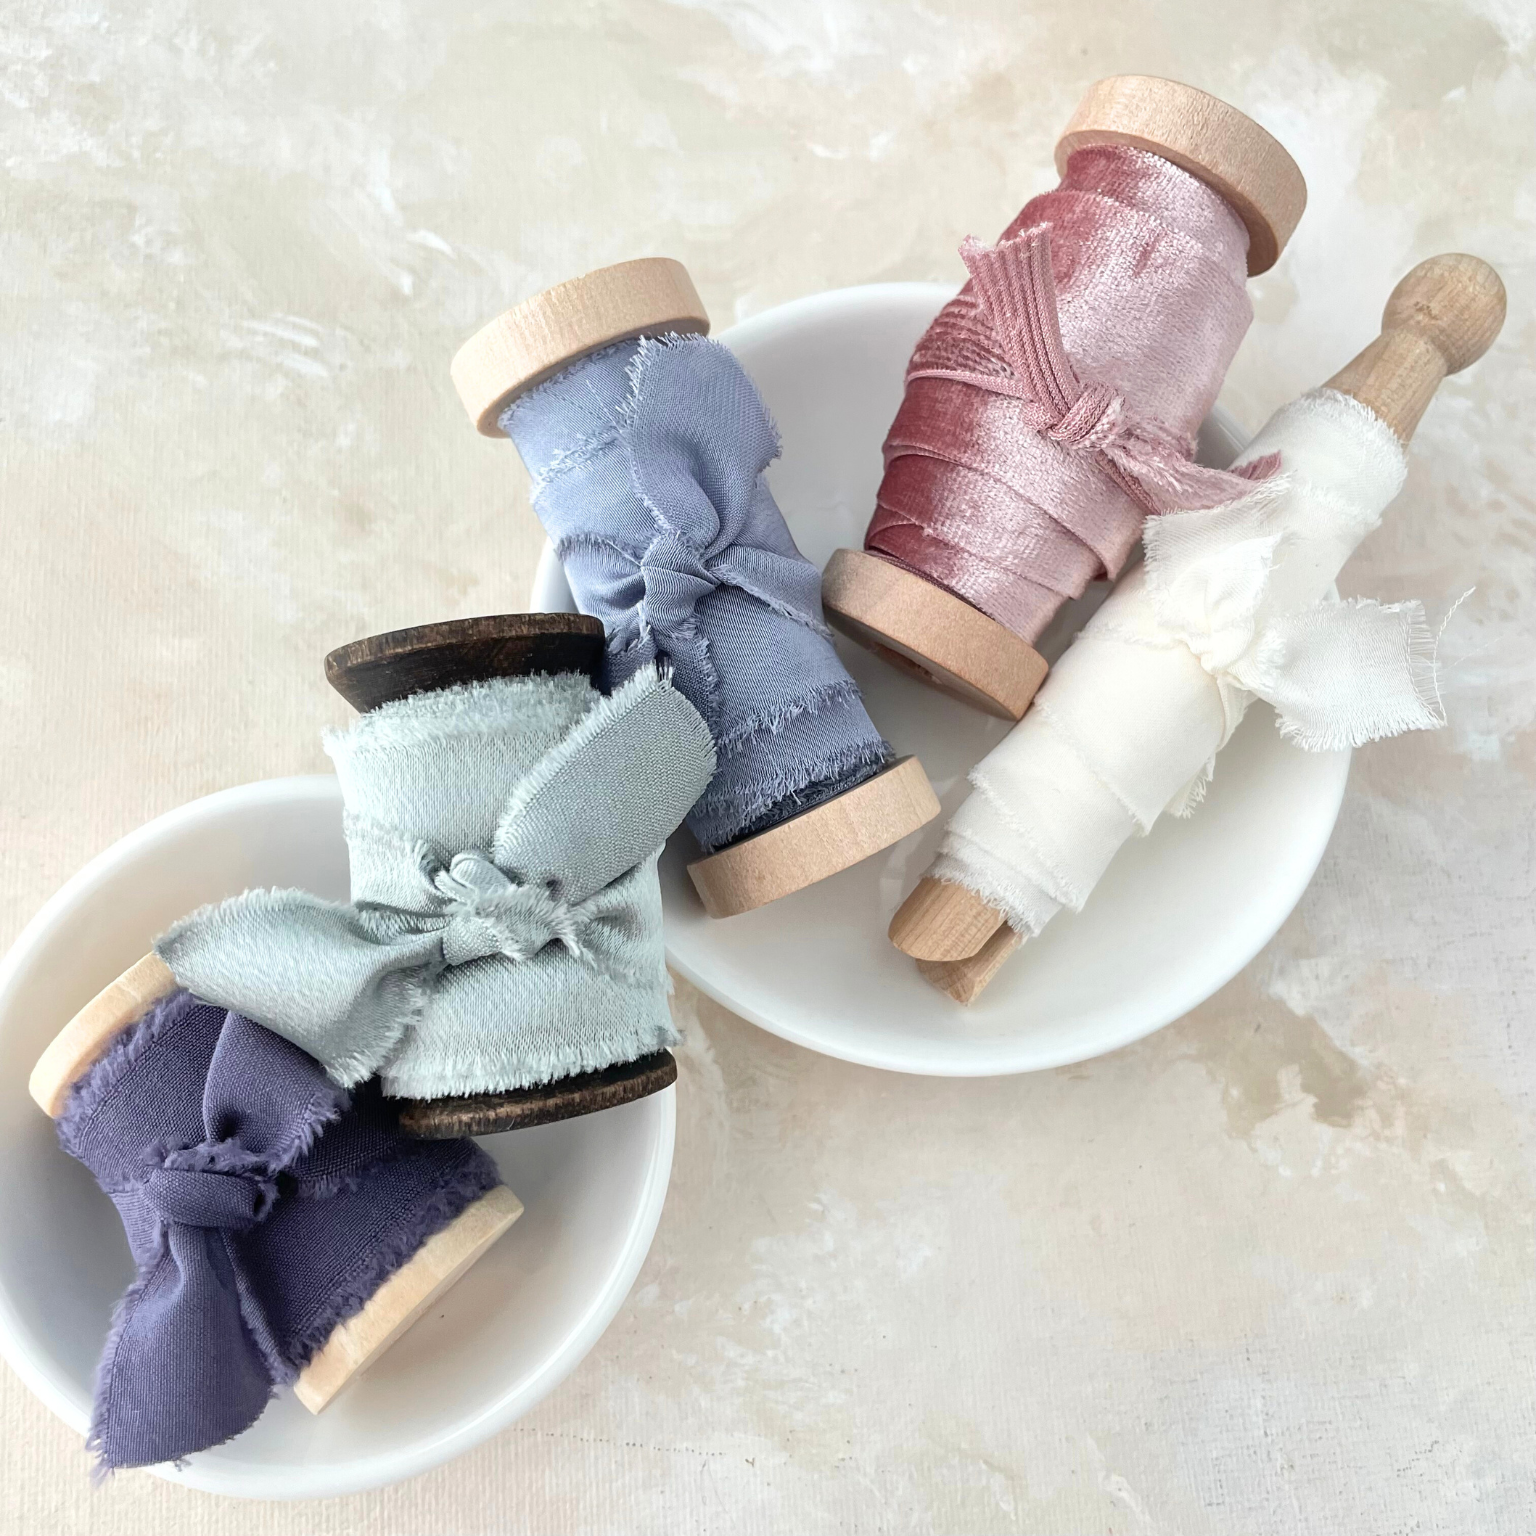 Ribbon Flat Lay Styling kit in Pastel Colors